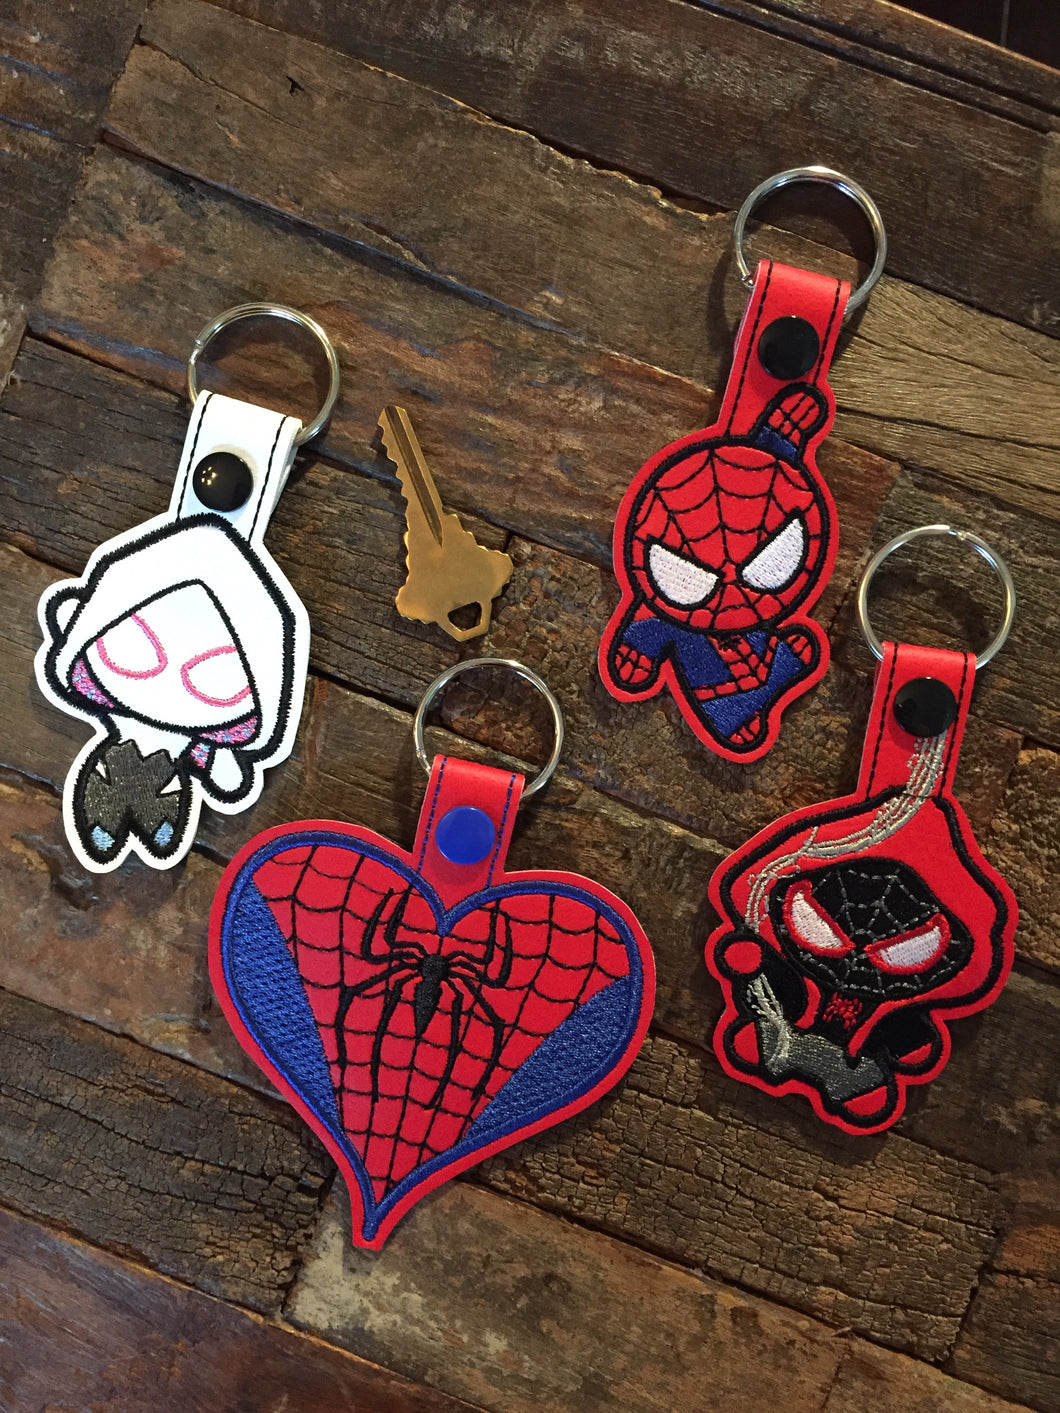 Key Fobs Inspired By Superhero Spiders - Keychains - Backpack Decoration - Bag Bling